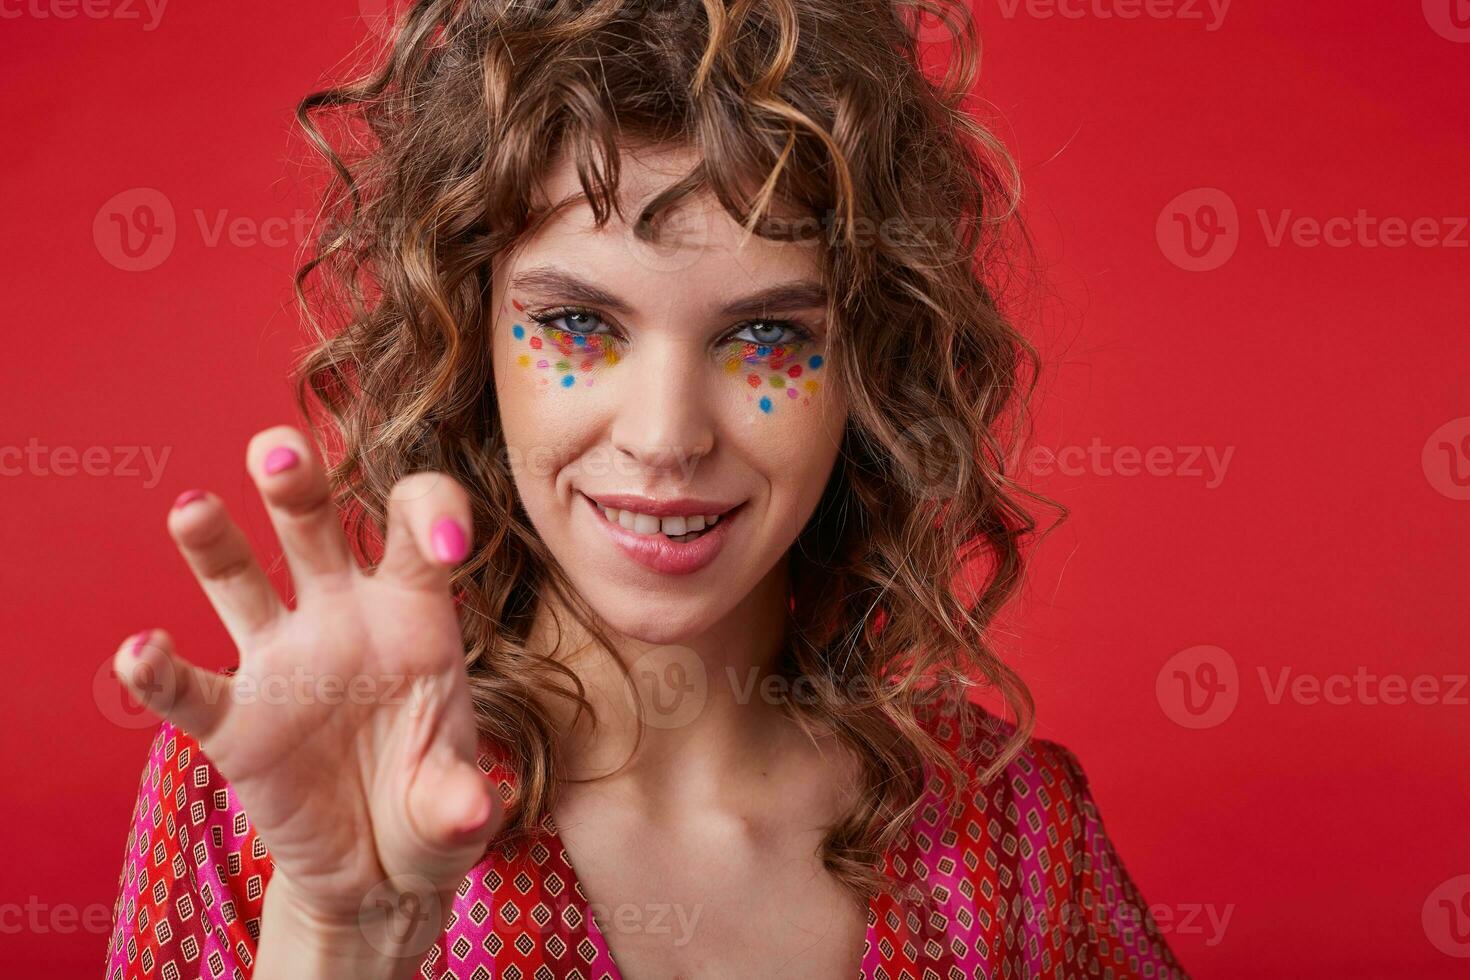 Coquettish young curly woman with multicolored dots on her face looking at camera and biting underlip, raising hand playfully while standing over red background in motley patterned top looking camera photo